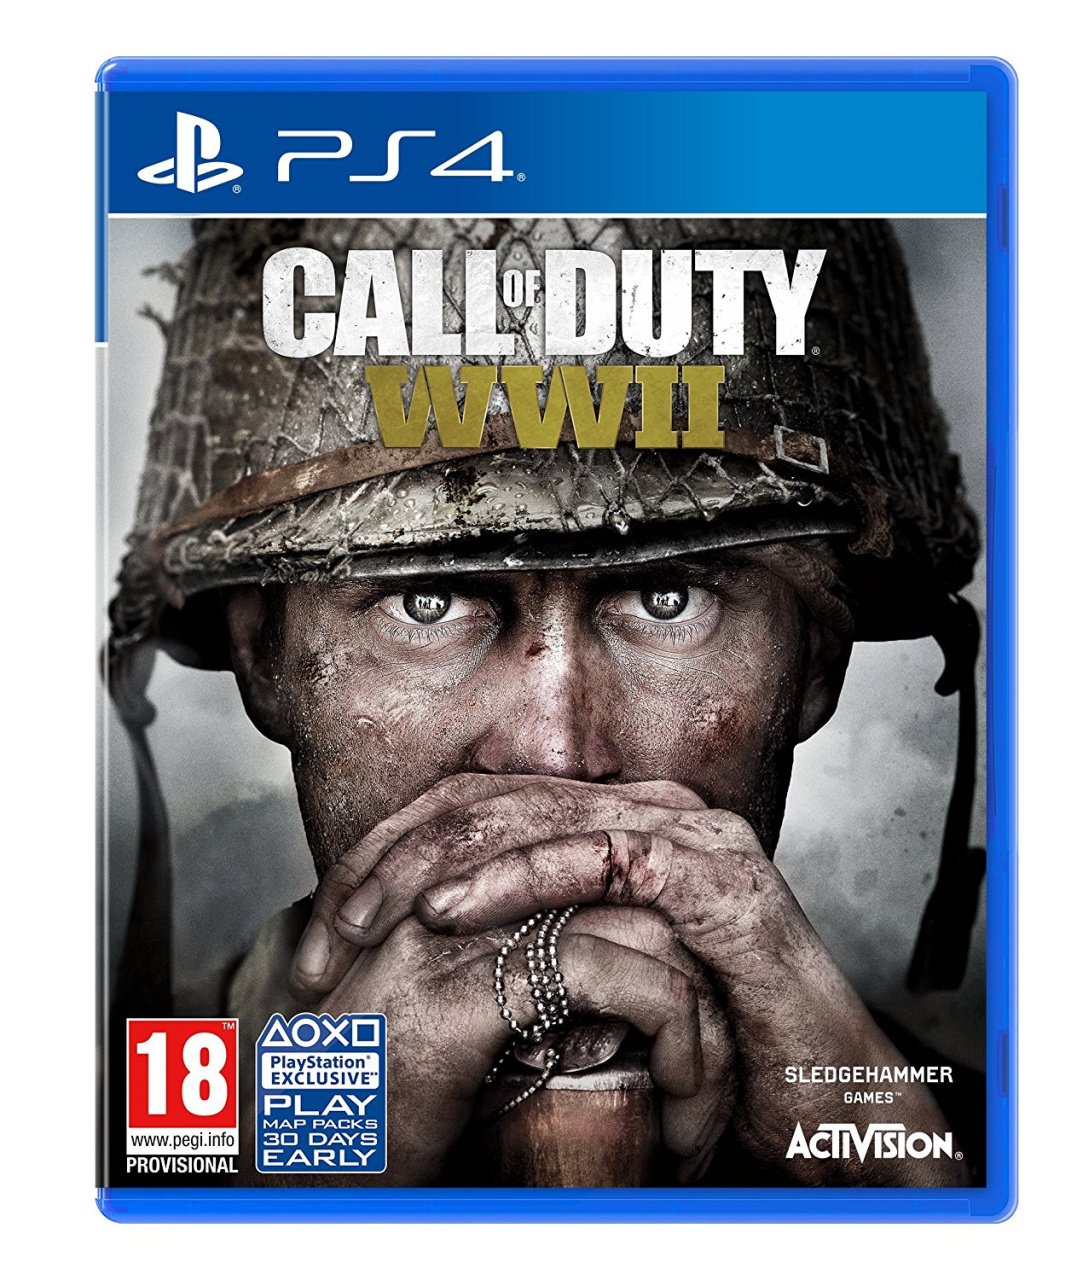 Call of Duty WW2 UK release date: Available for preorder and pre